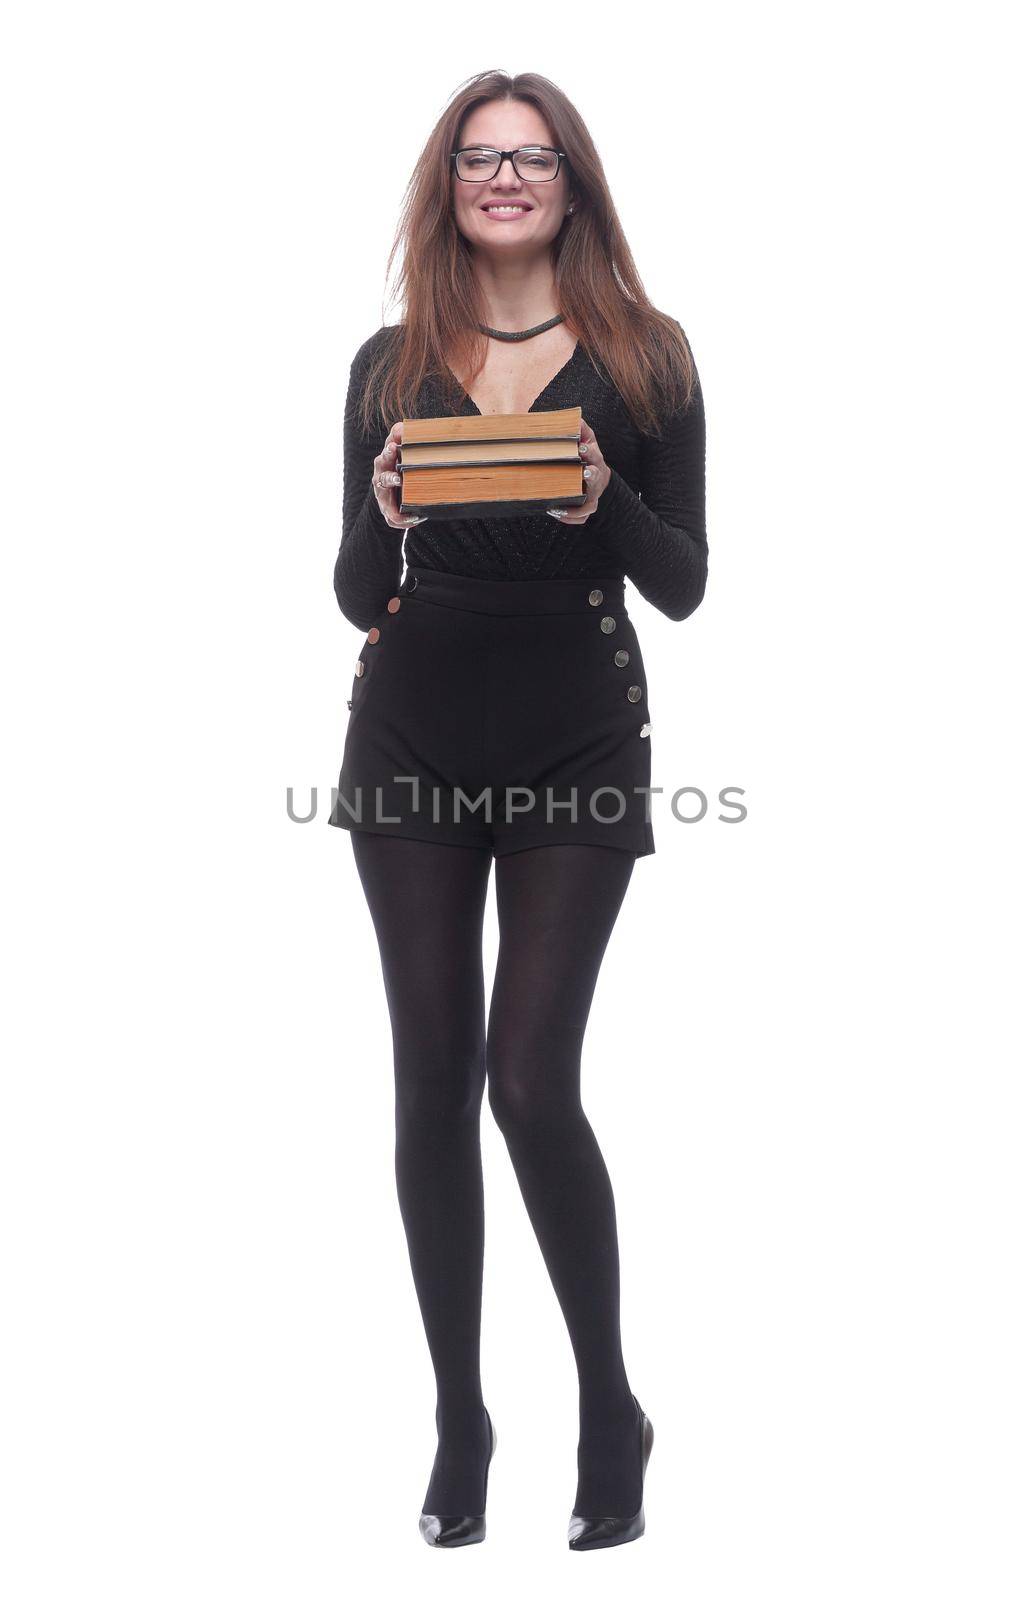 in full growth. elegant young woman with a stack of books . isolated on a white background.